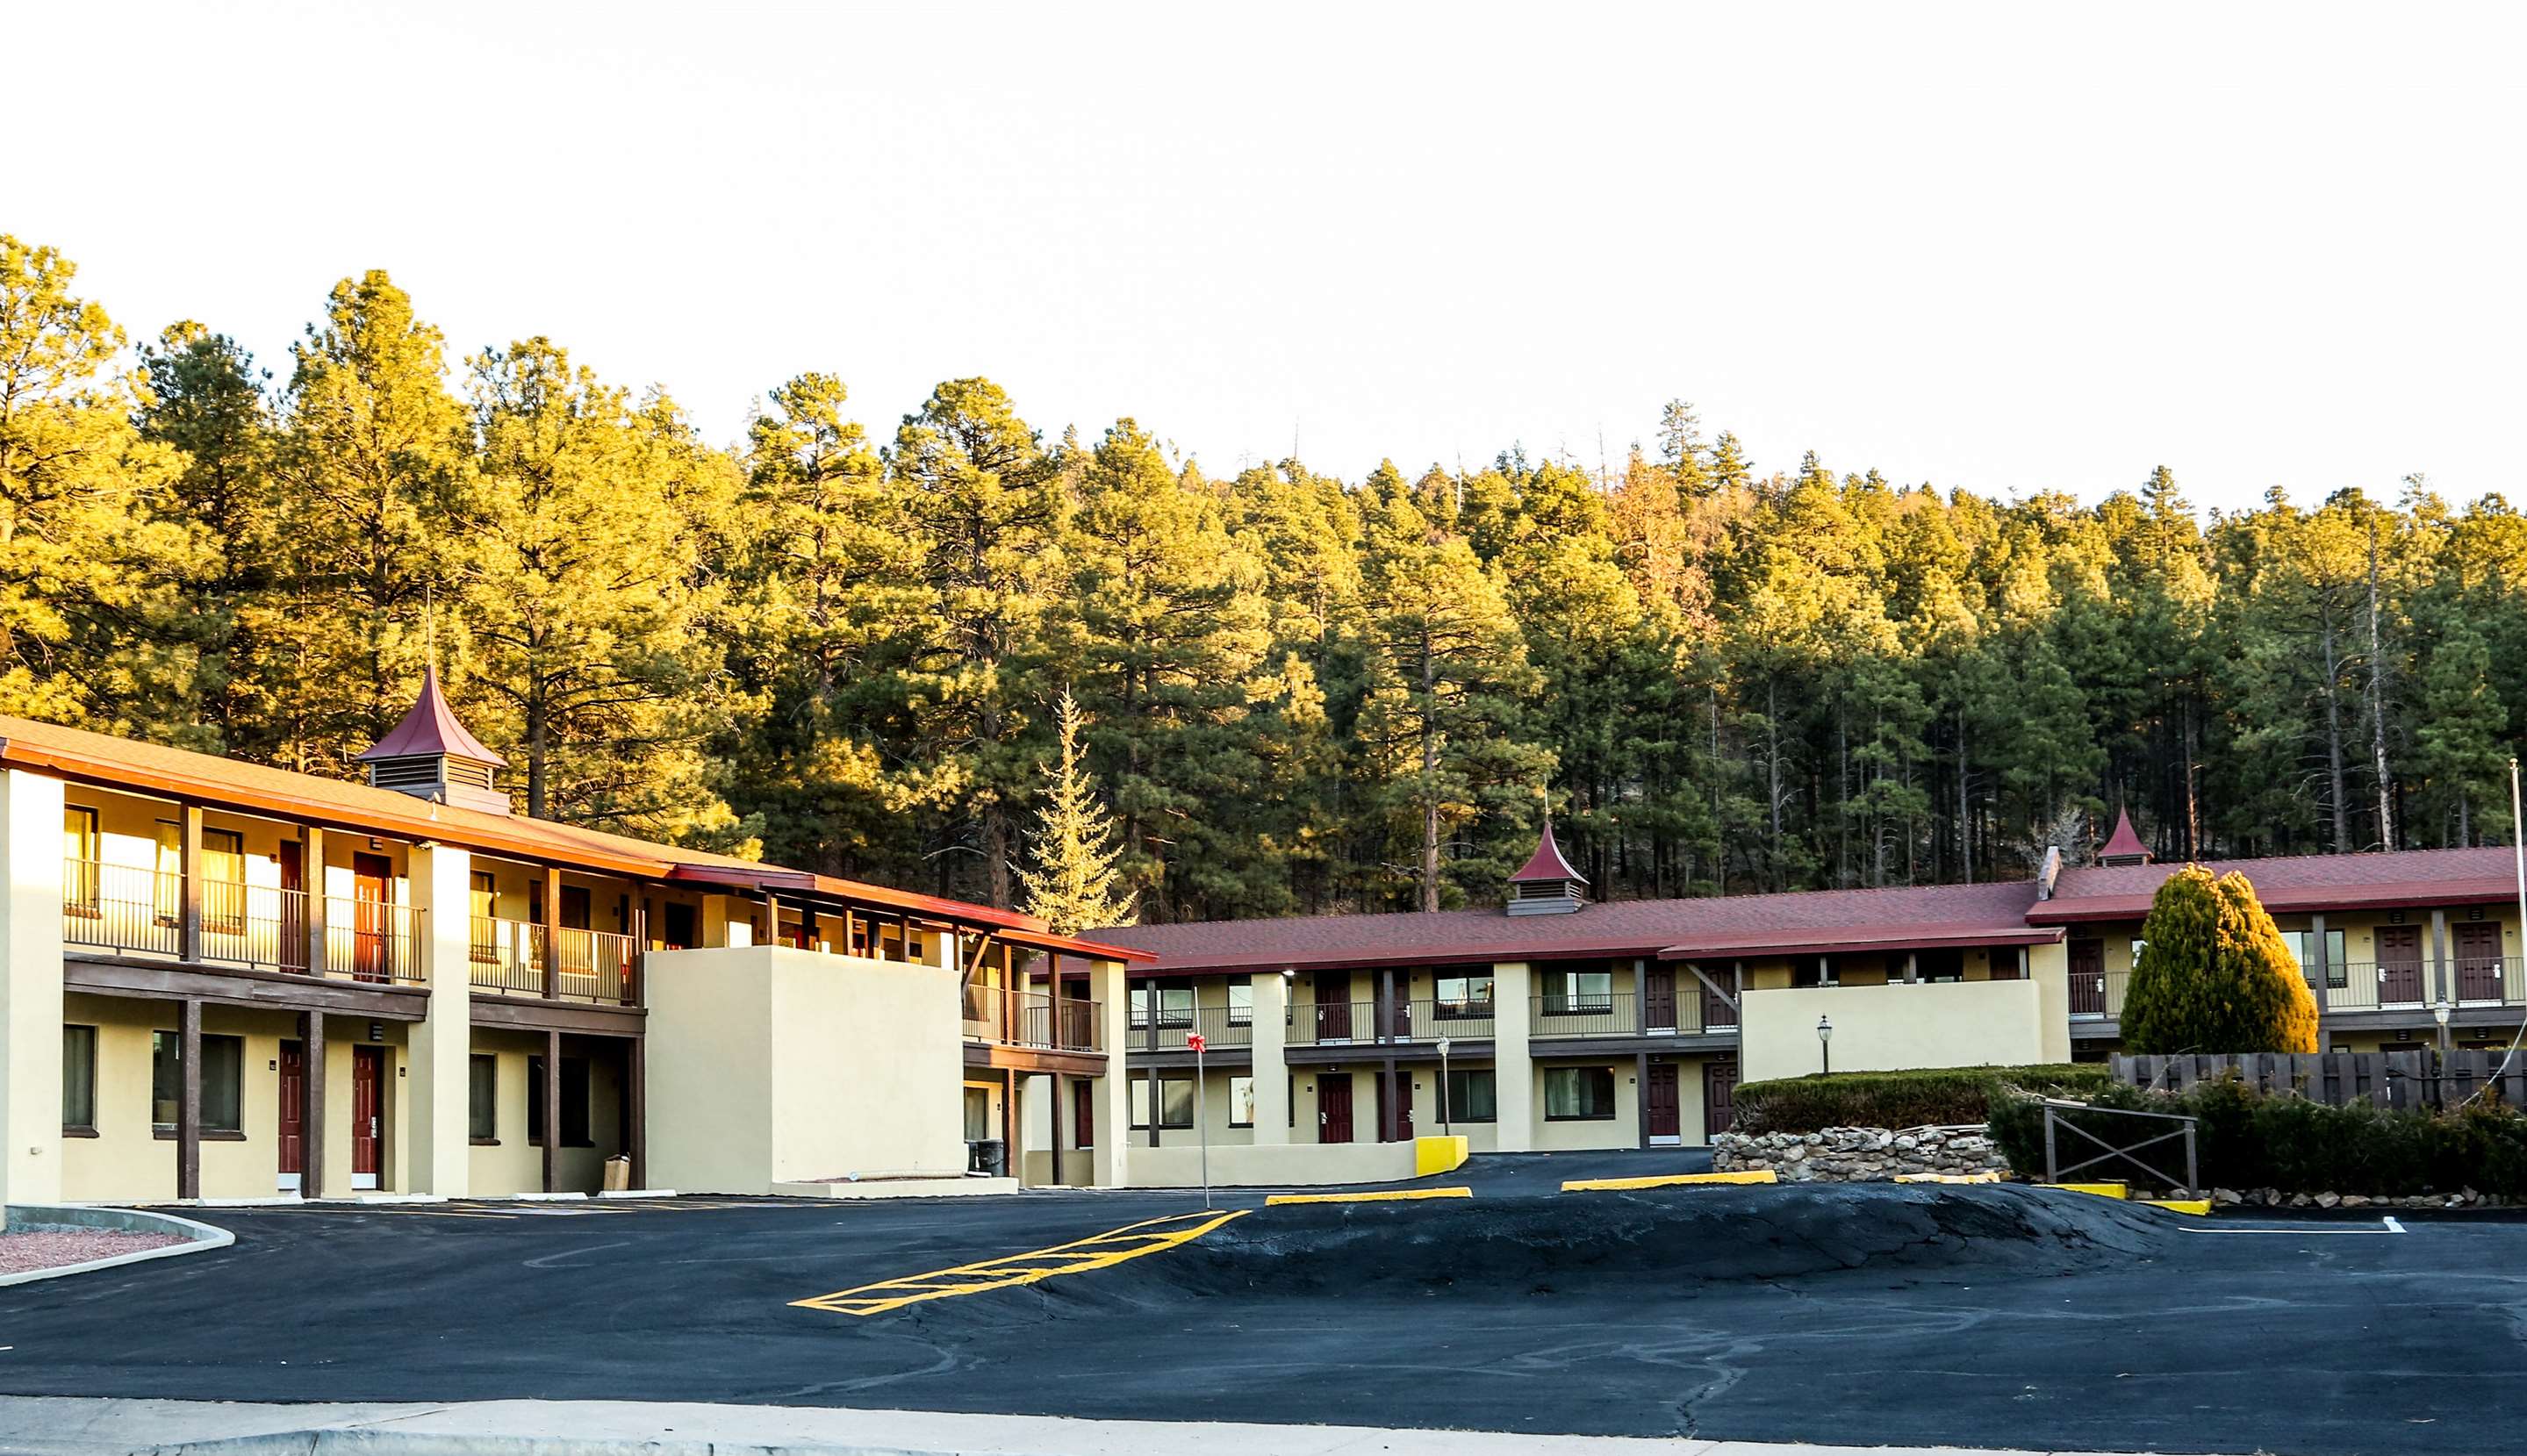 Red Roof Inn Plus+ Williams - Grand Canyon